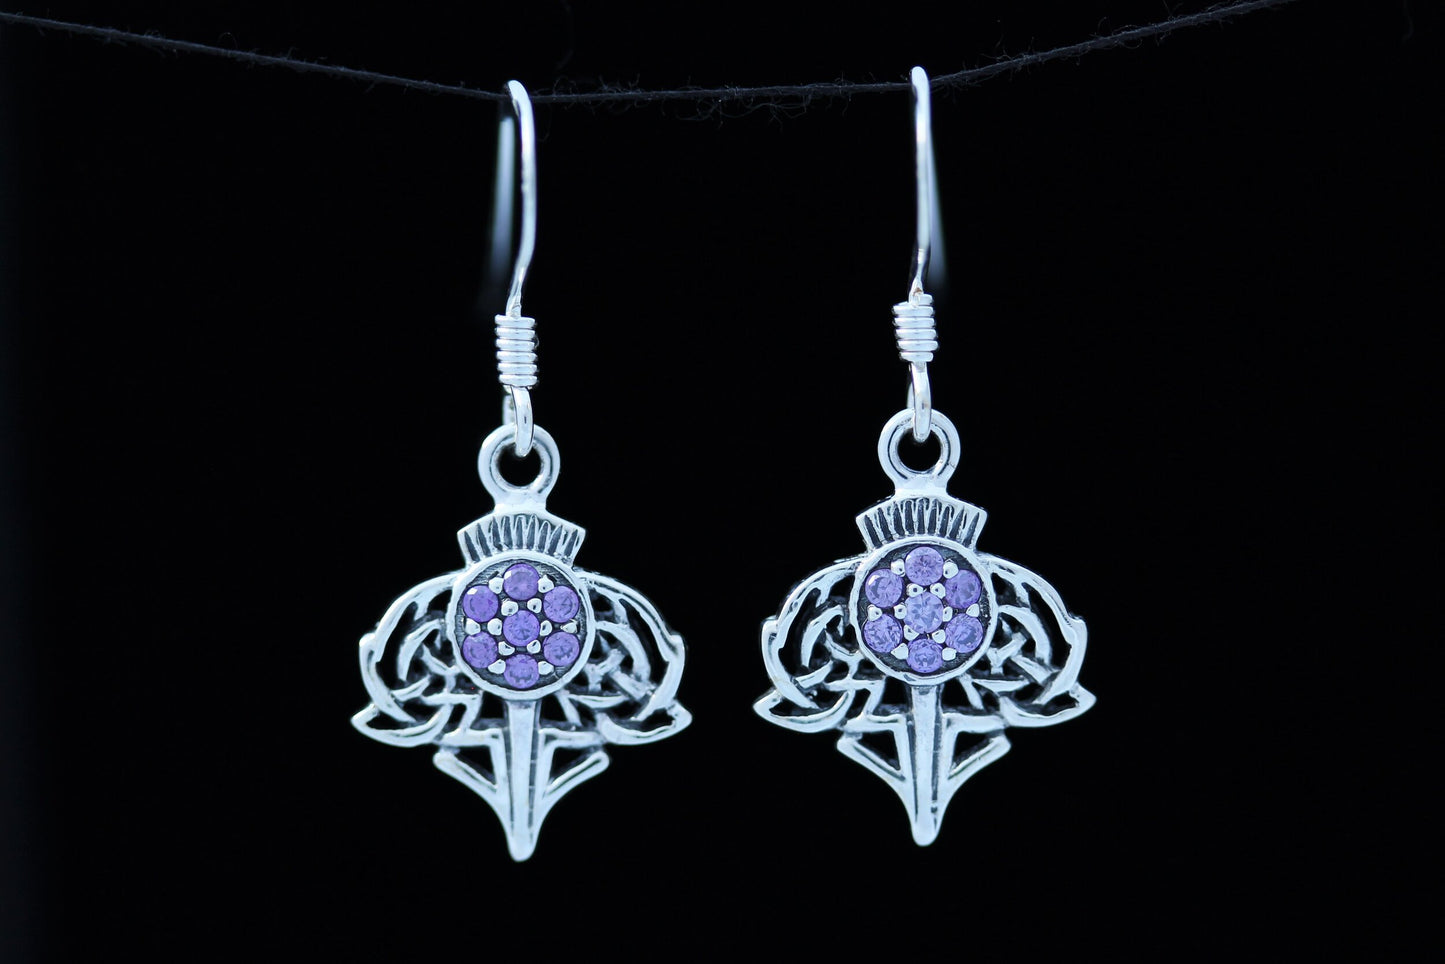 Scottish Thistle Earrings Zircon - Jewelled Crown with Celtic Knot Leaves